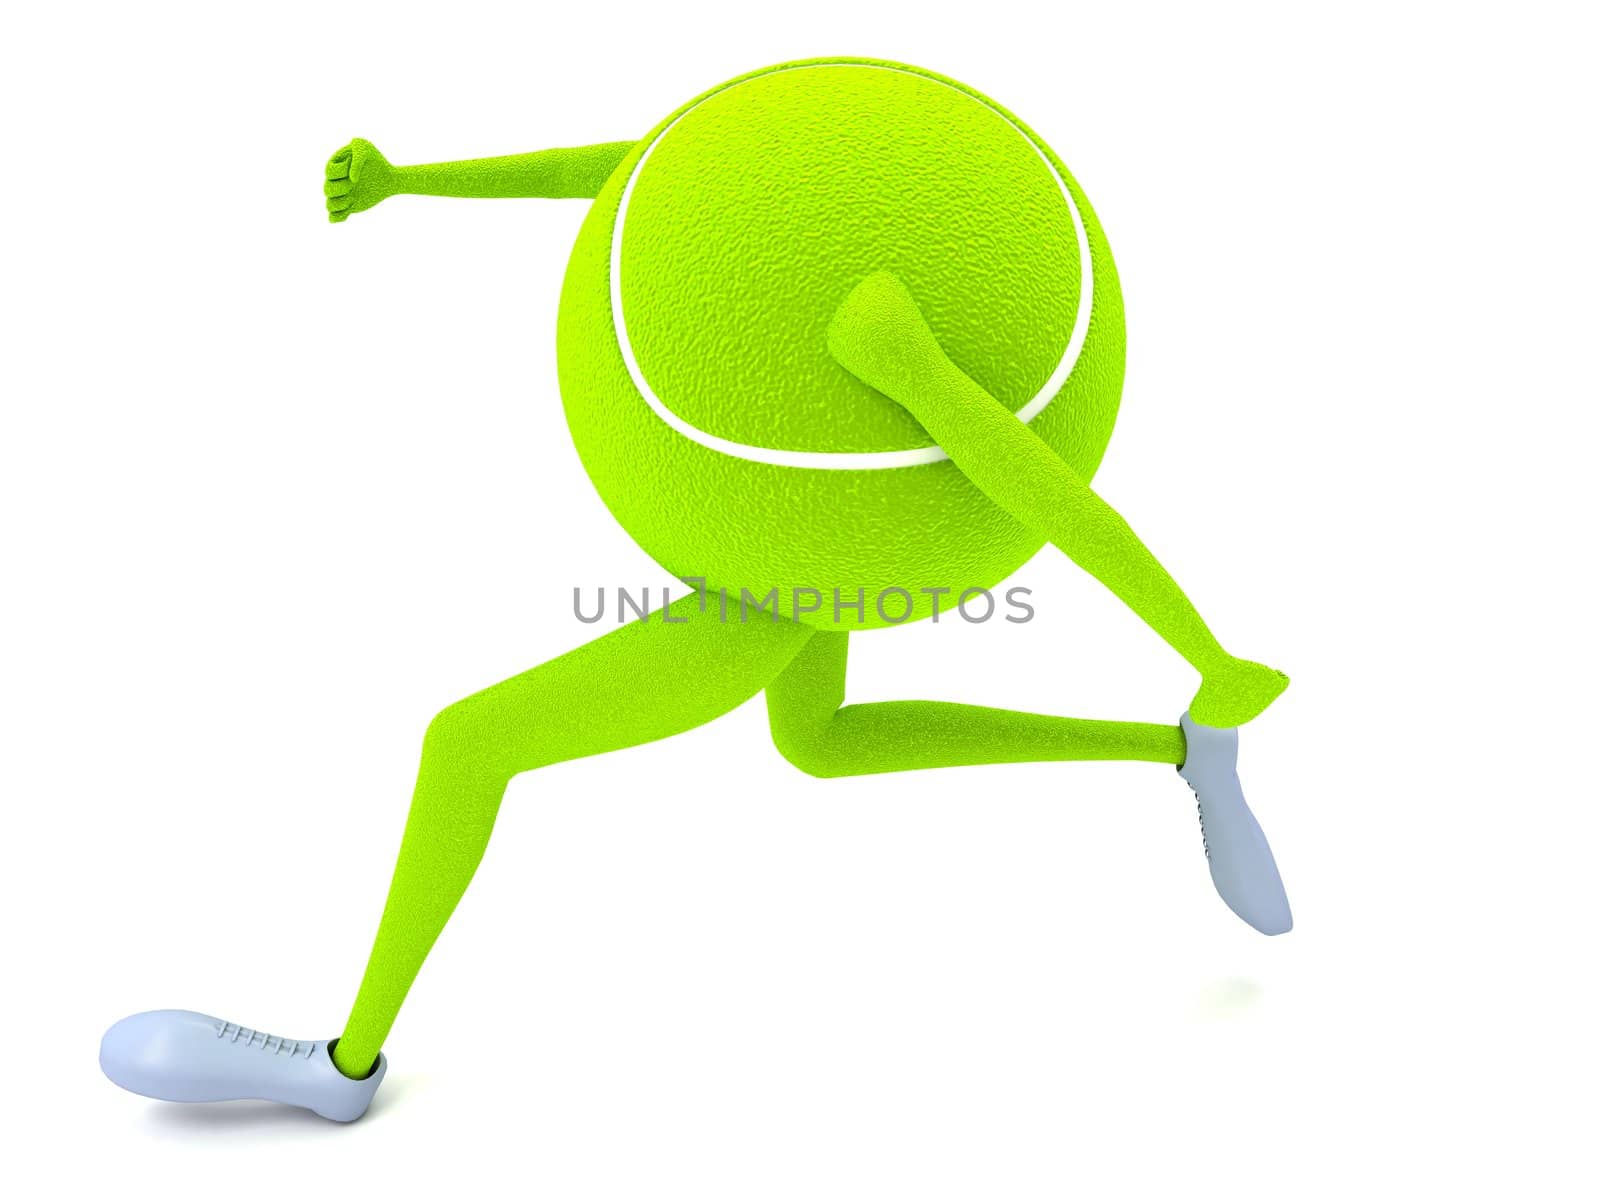 three dimensional running tennis ball by imagerymajestic